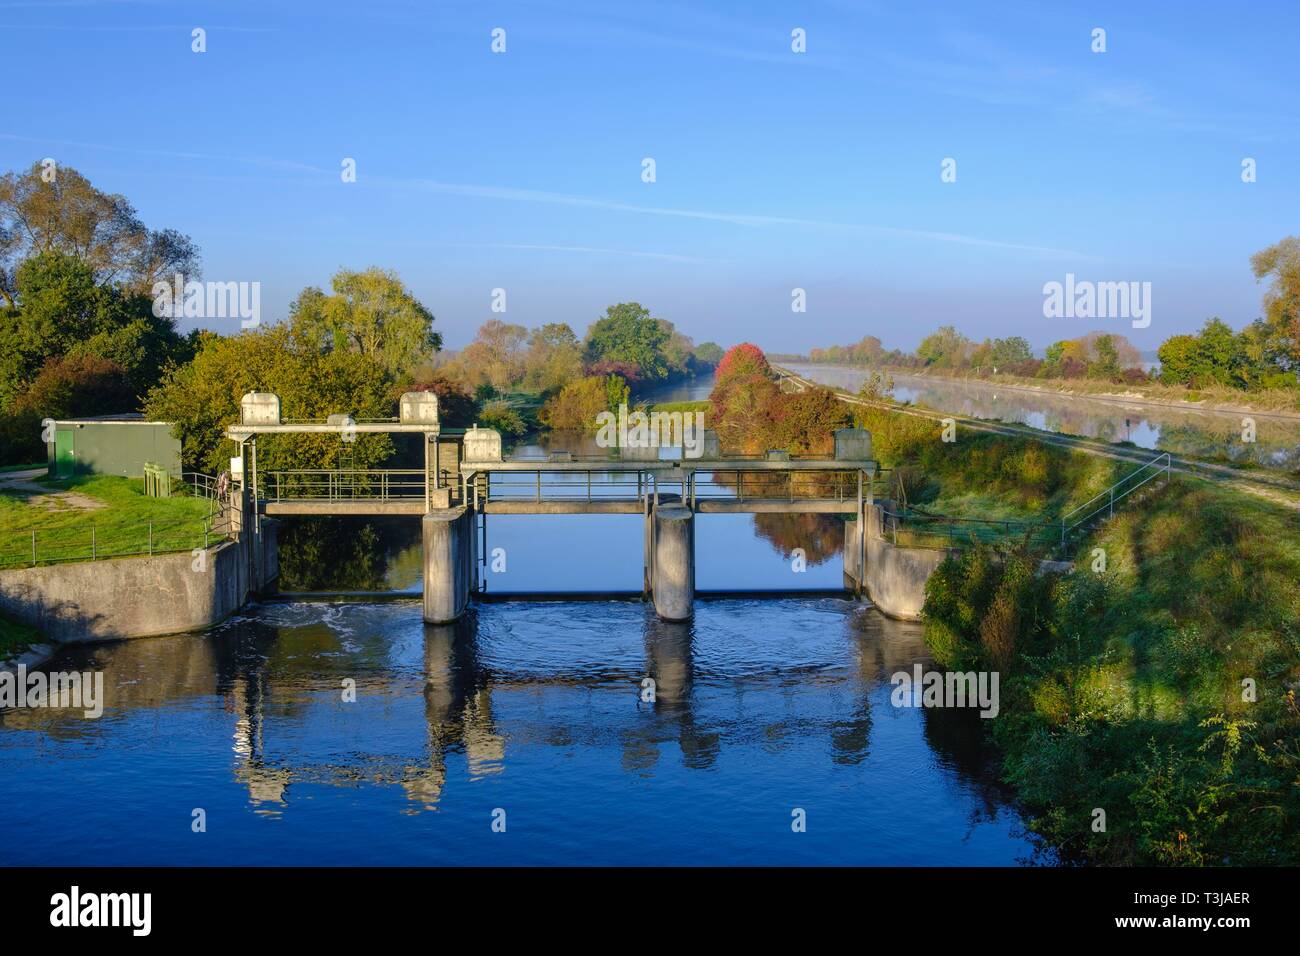 Weir and Isar canal at the Ismaninger reservoir, near Pliening, Upper Bavaria, Bavaria, Germany Stock Photo